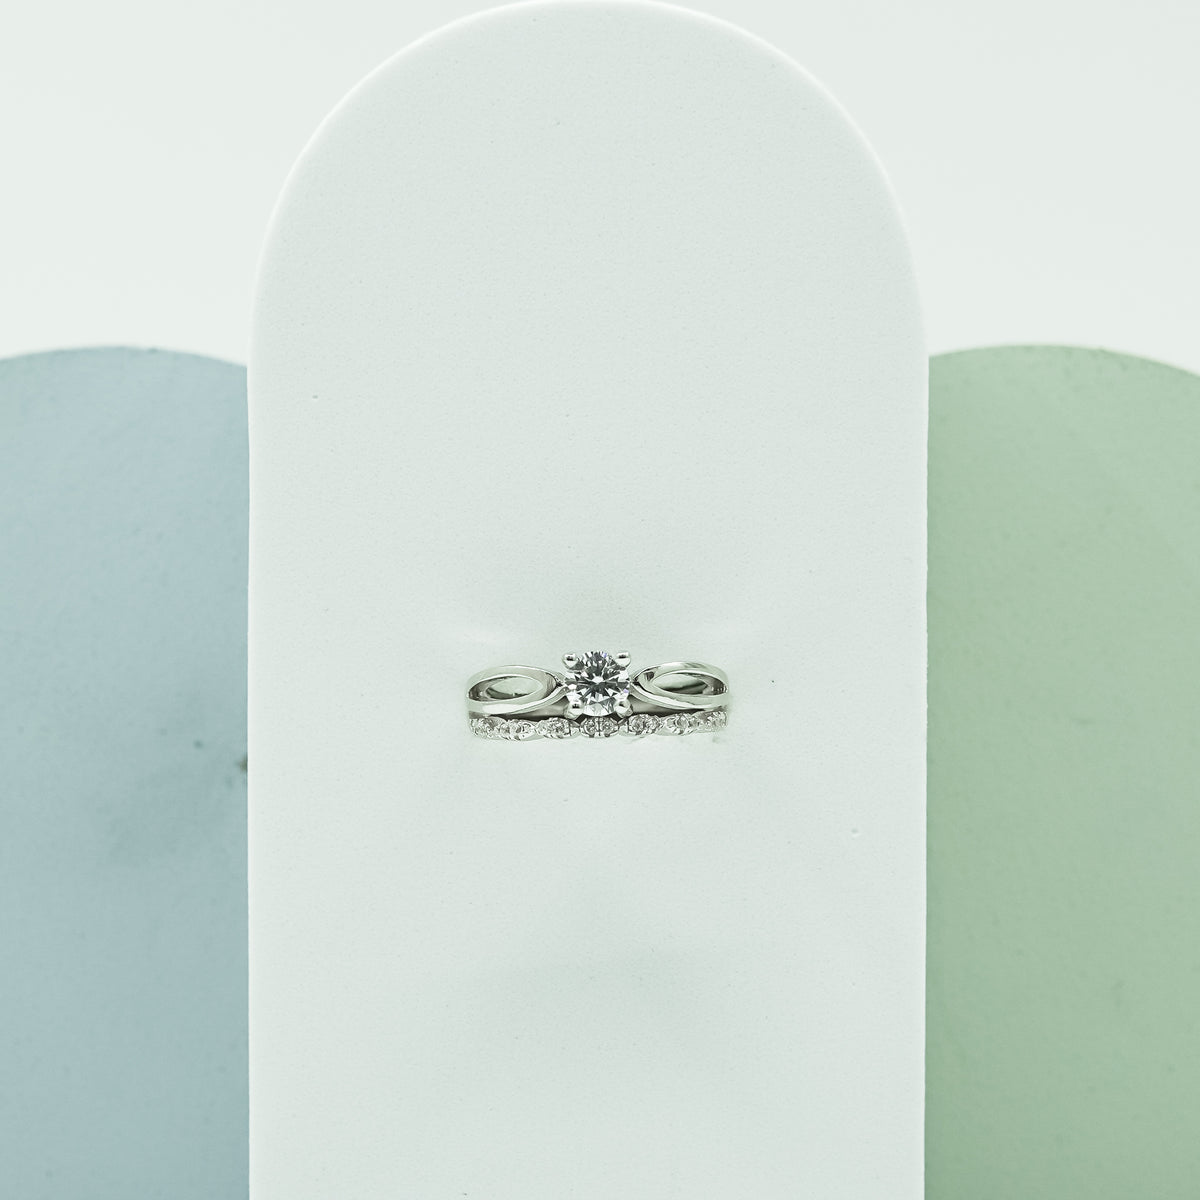 Strip Solitaire Ring